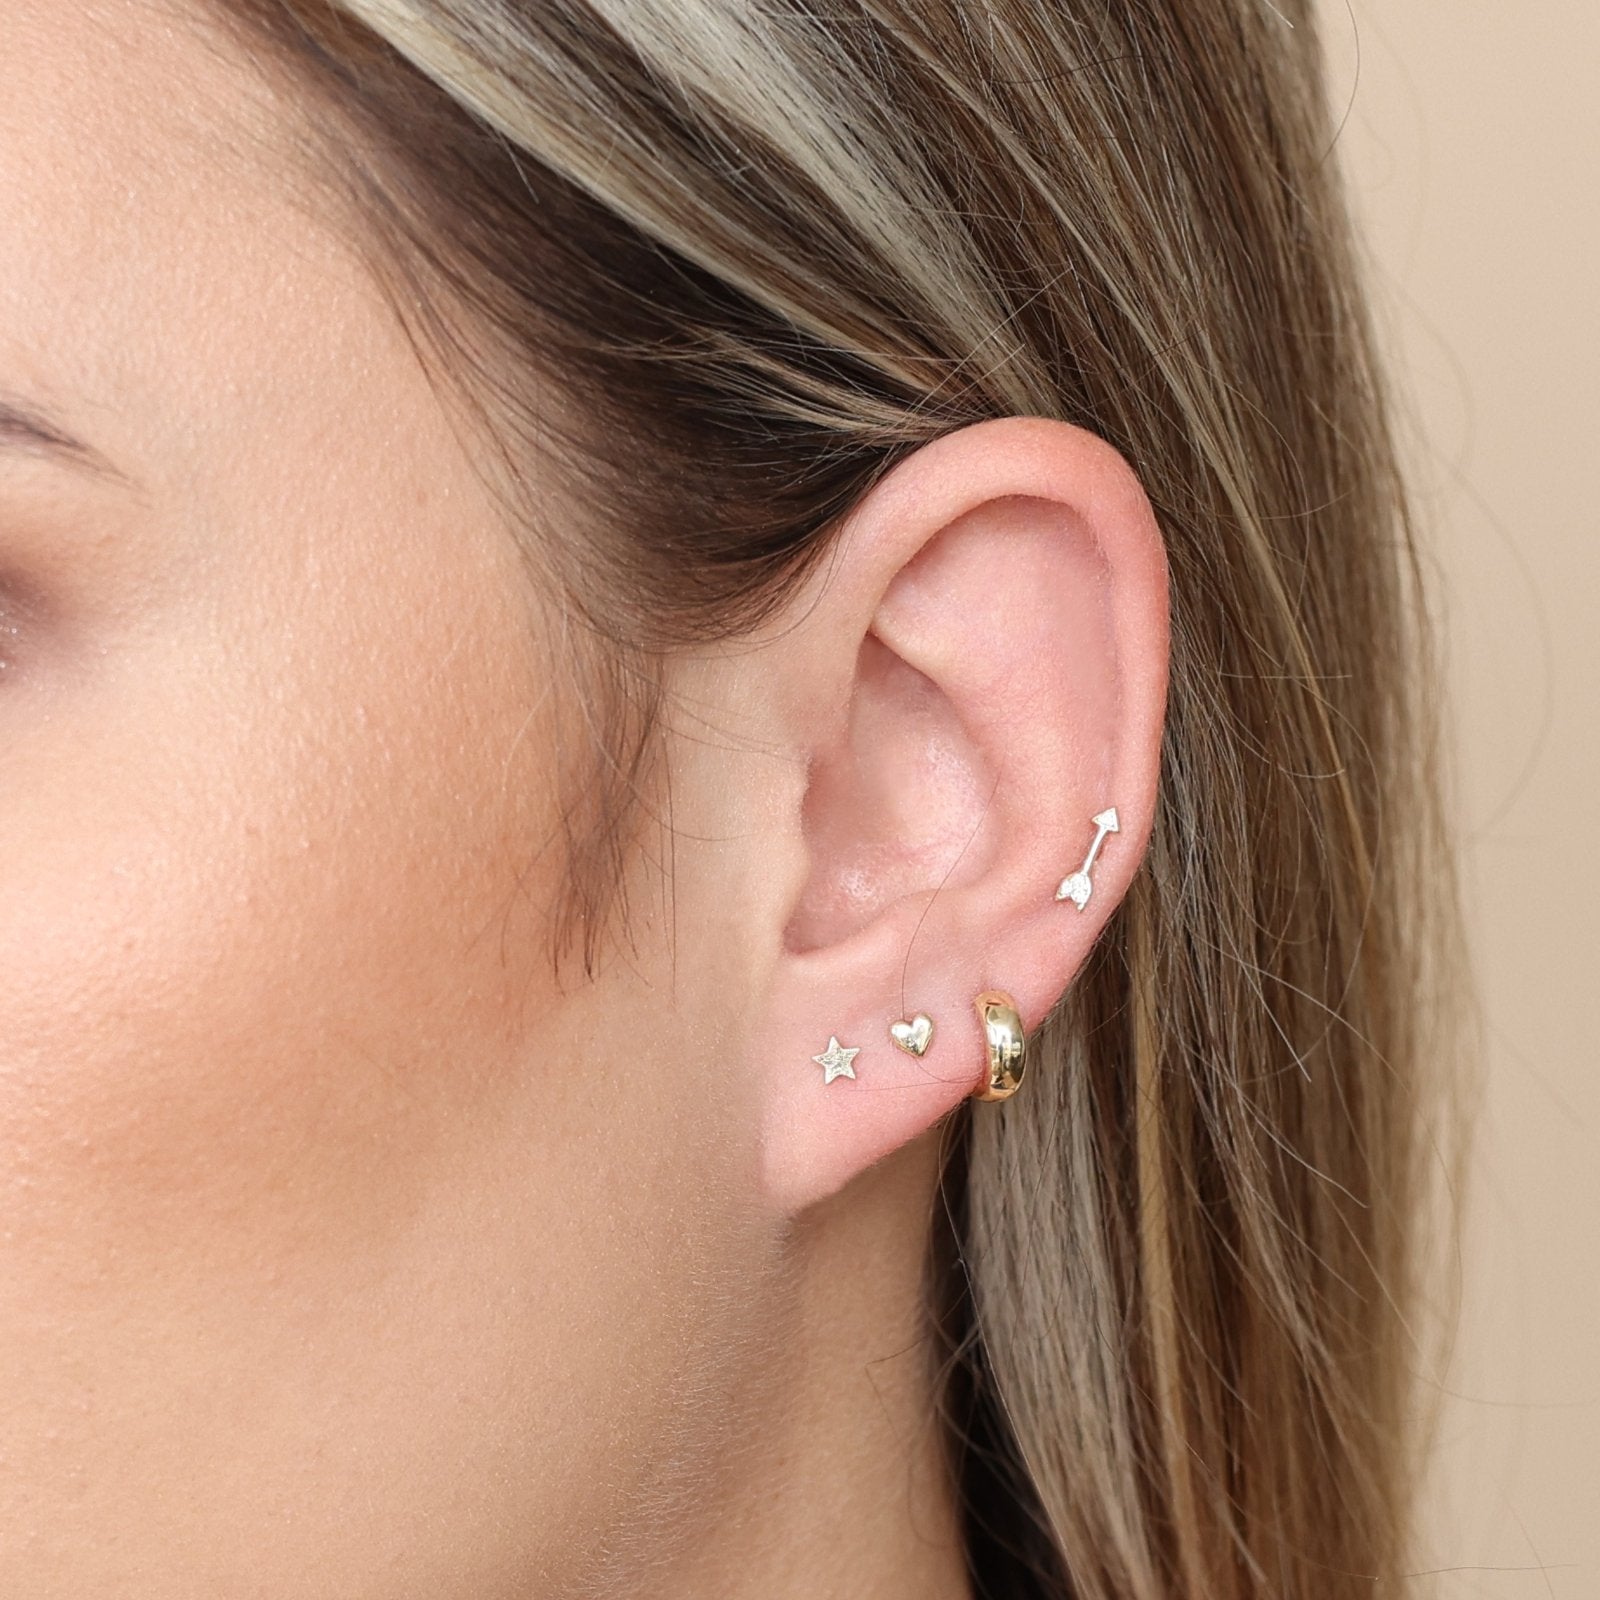 Bubble Hoop Illusion Ear Cuff Earring in Yellow Gold Earrings Estella Collection #product_description# 17899 14k Cartilage Earring cartilage hoop #tag4# #tag5# #tag6# #tag7# #tag8# #tag9# #tag10#